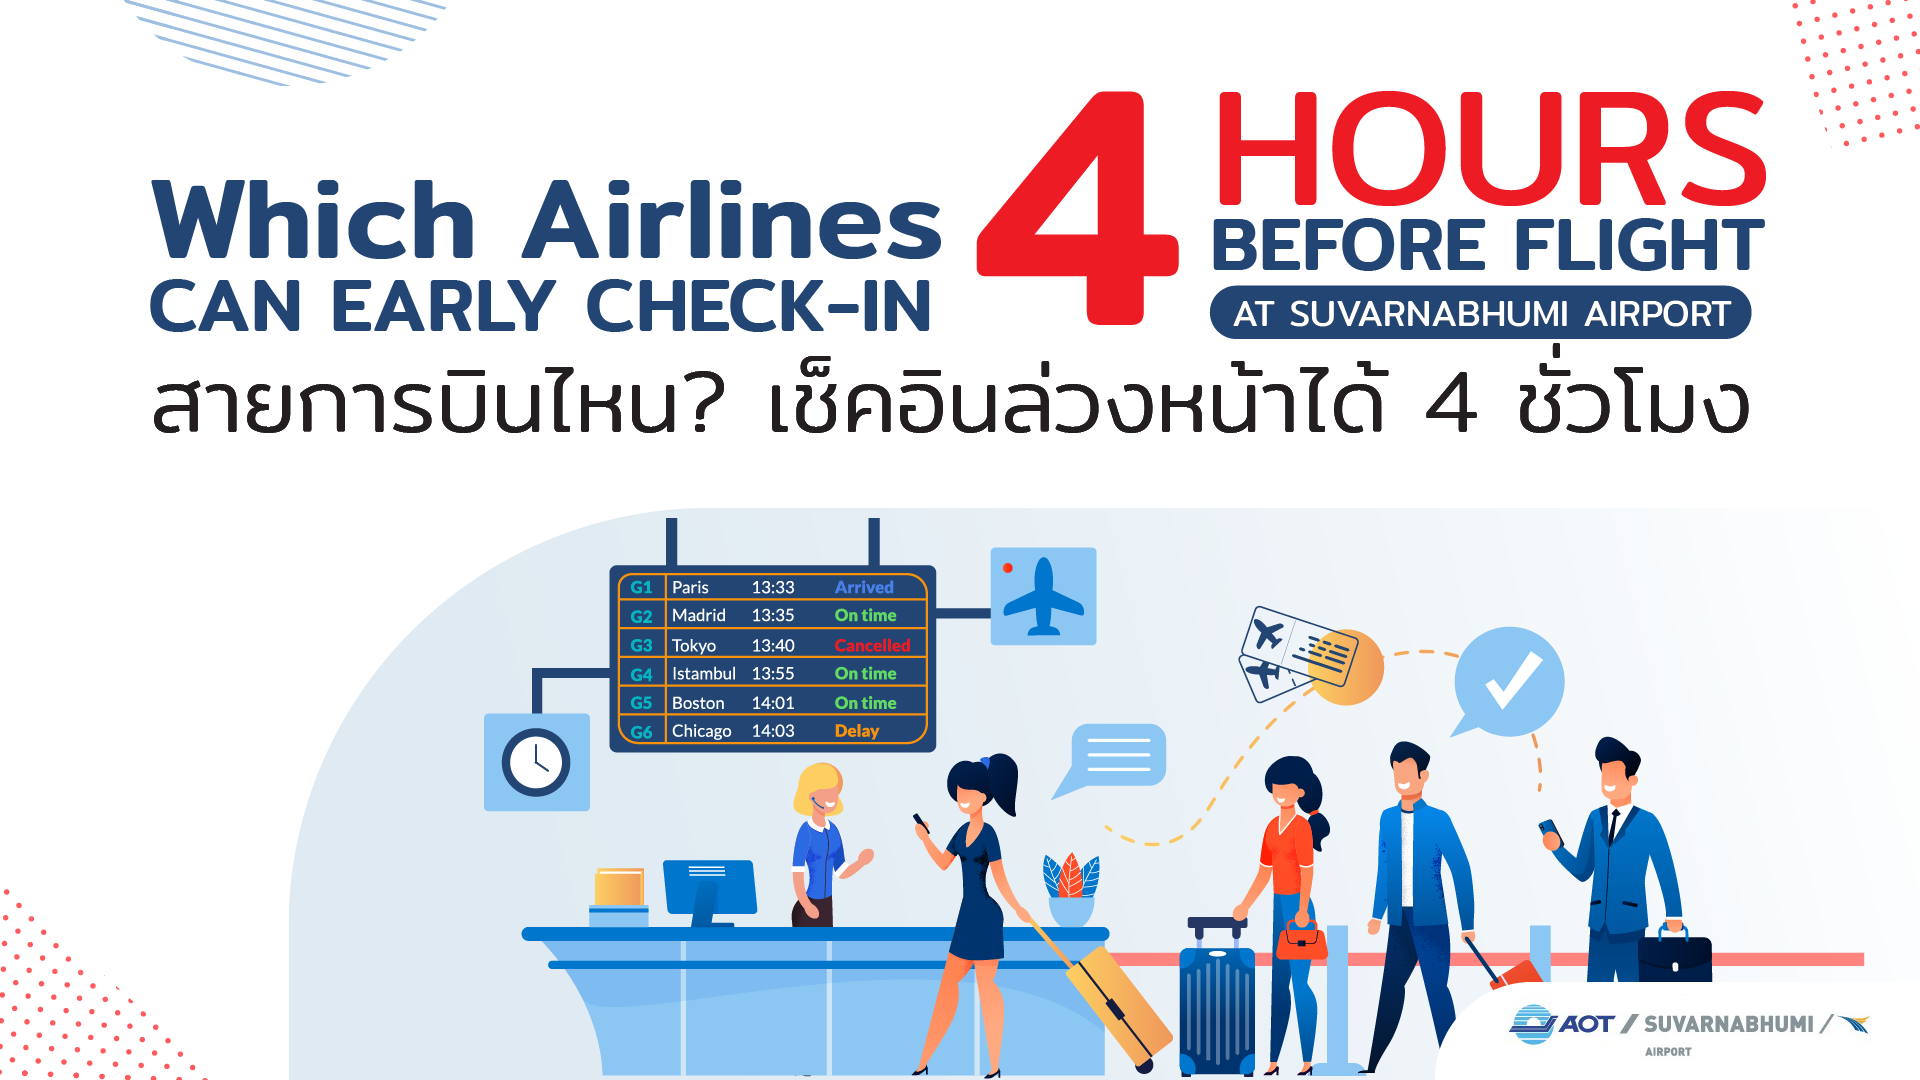 23 airlines offering the option to check in up to 4 hours before the ...